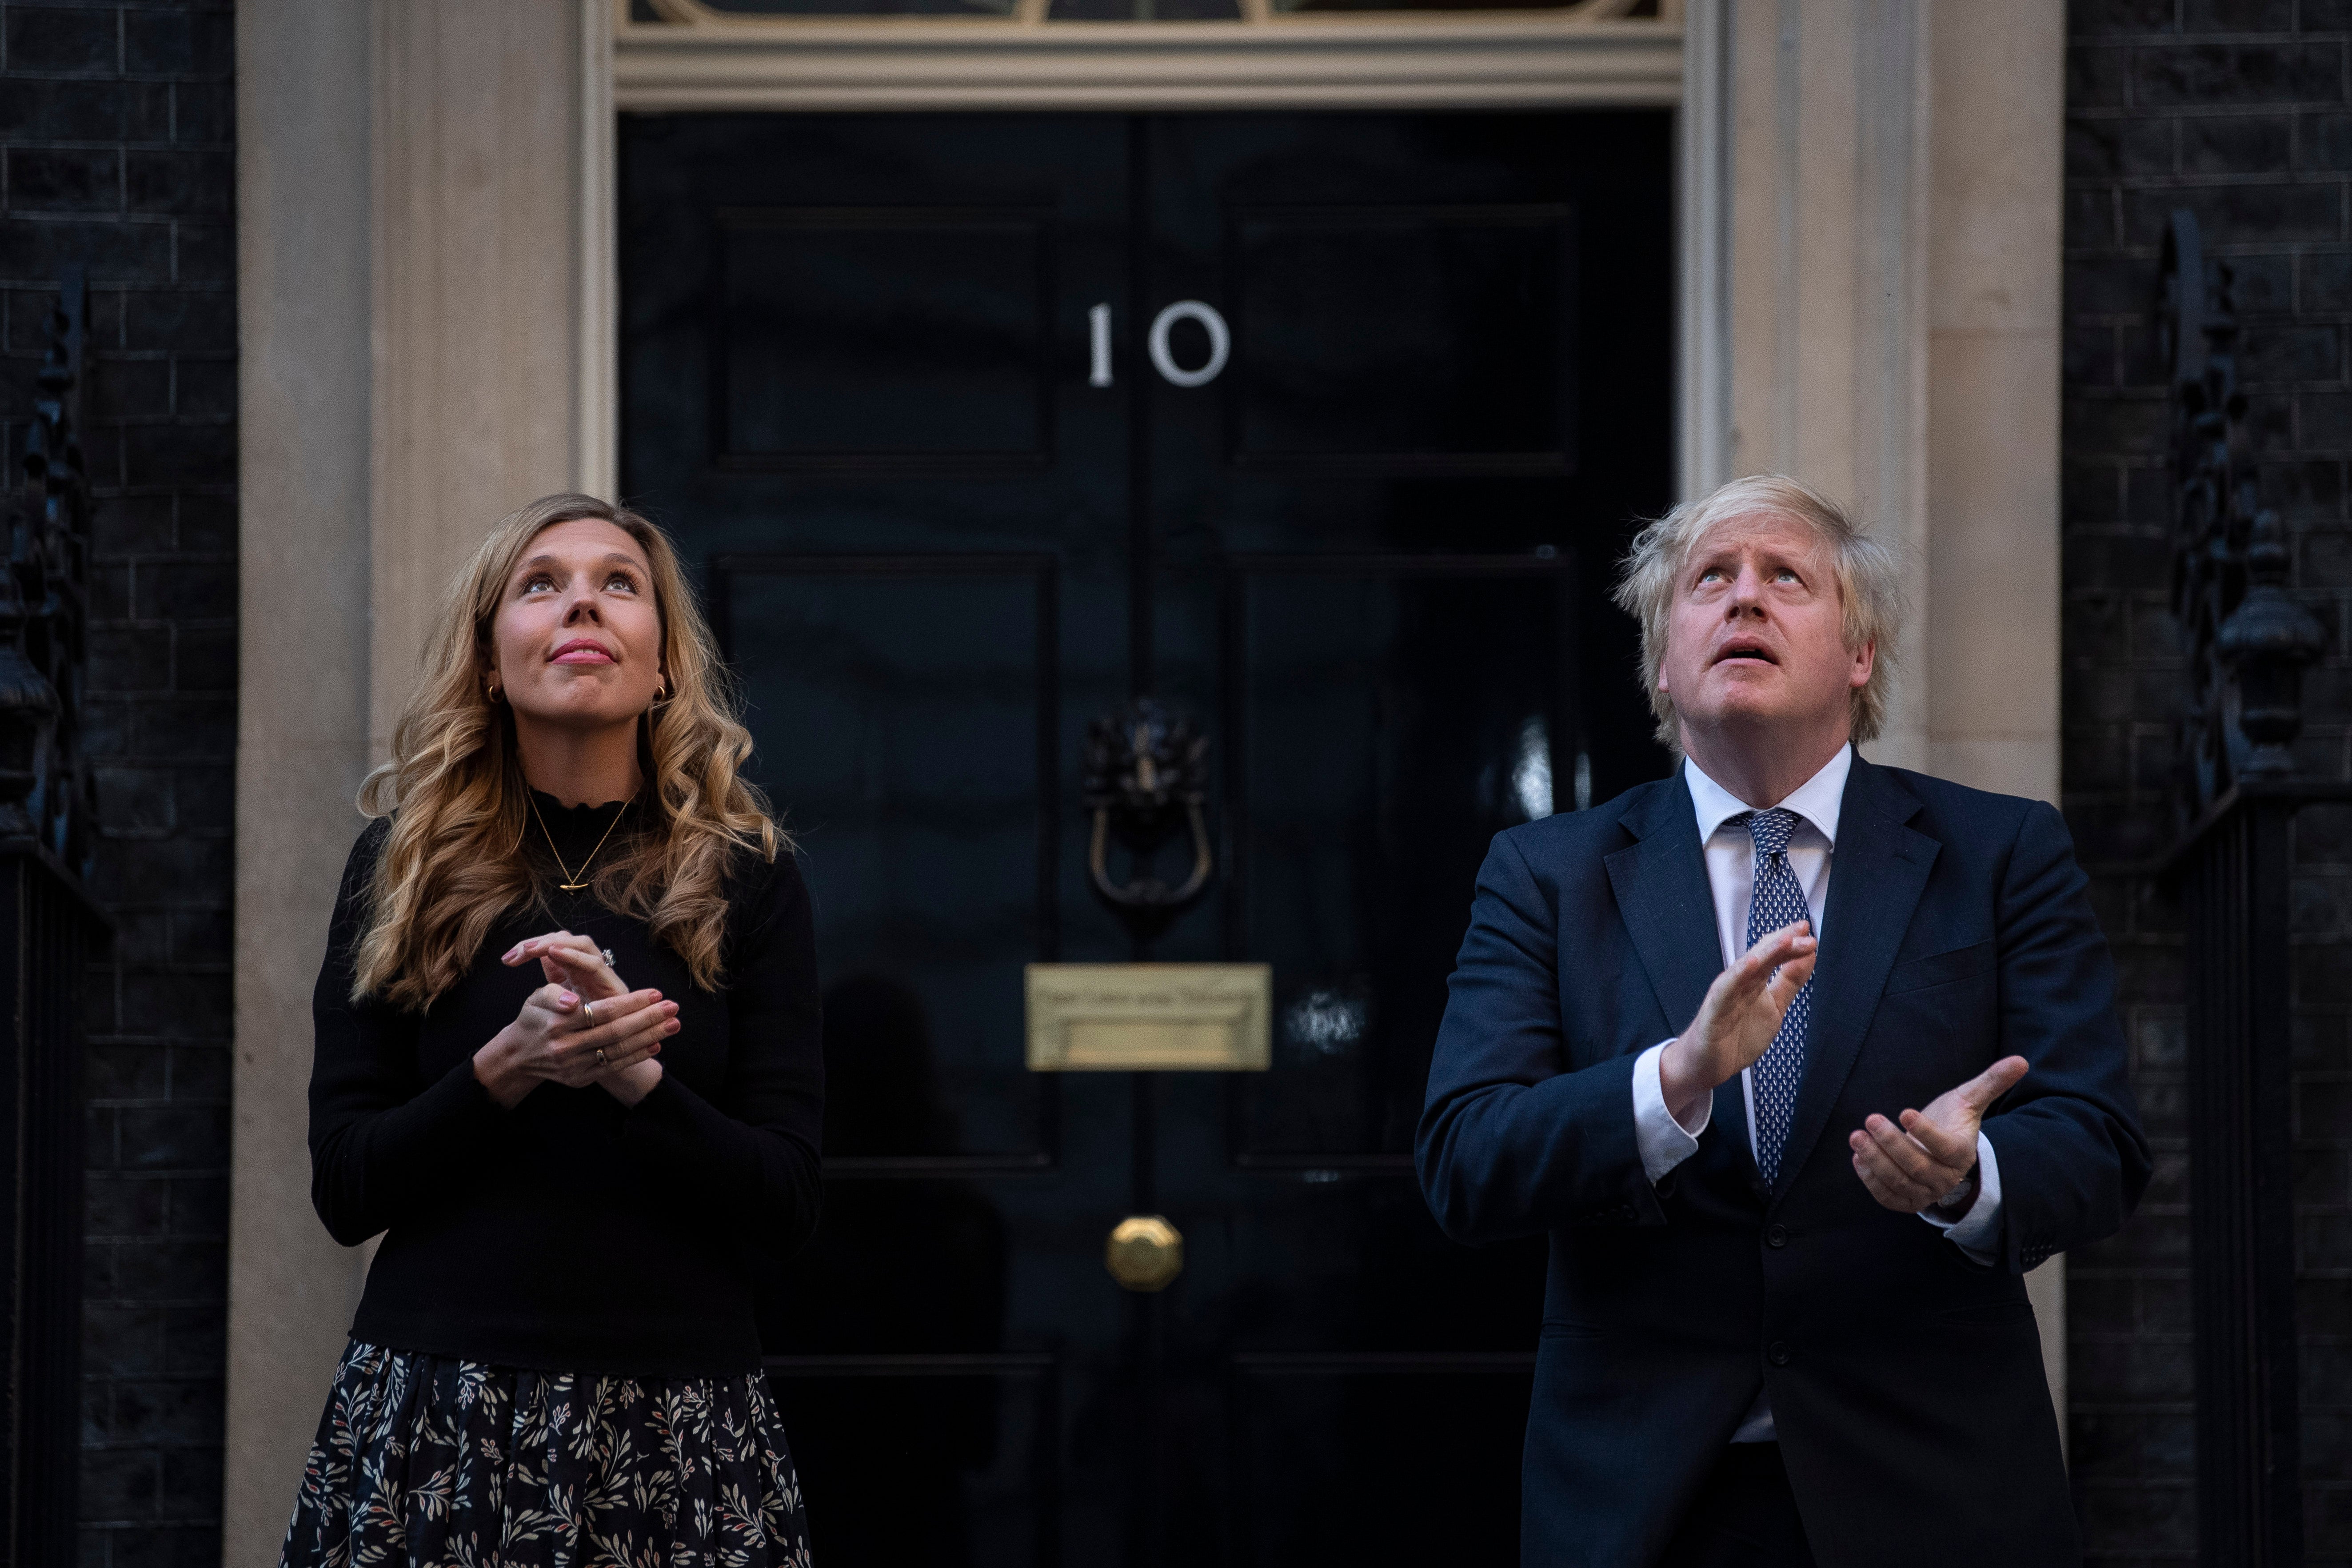 Prime Minister Boris Johnson and his wife Carrie stand in Downing Street (Victoria Jones/PA)